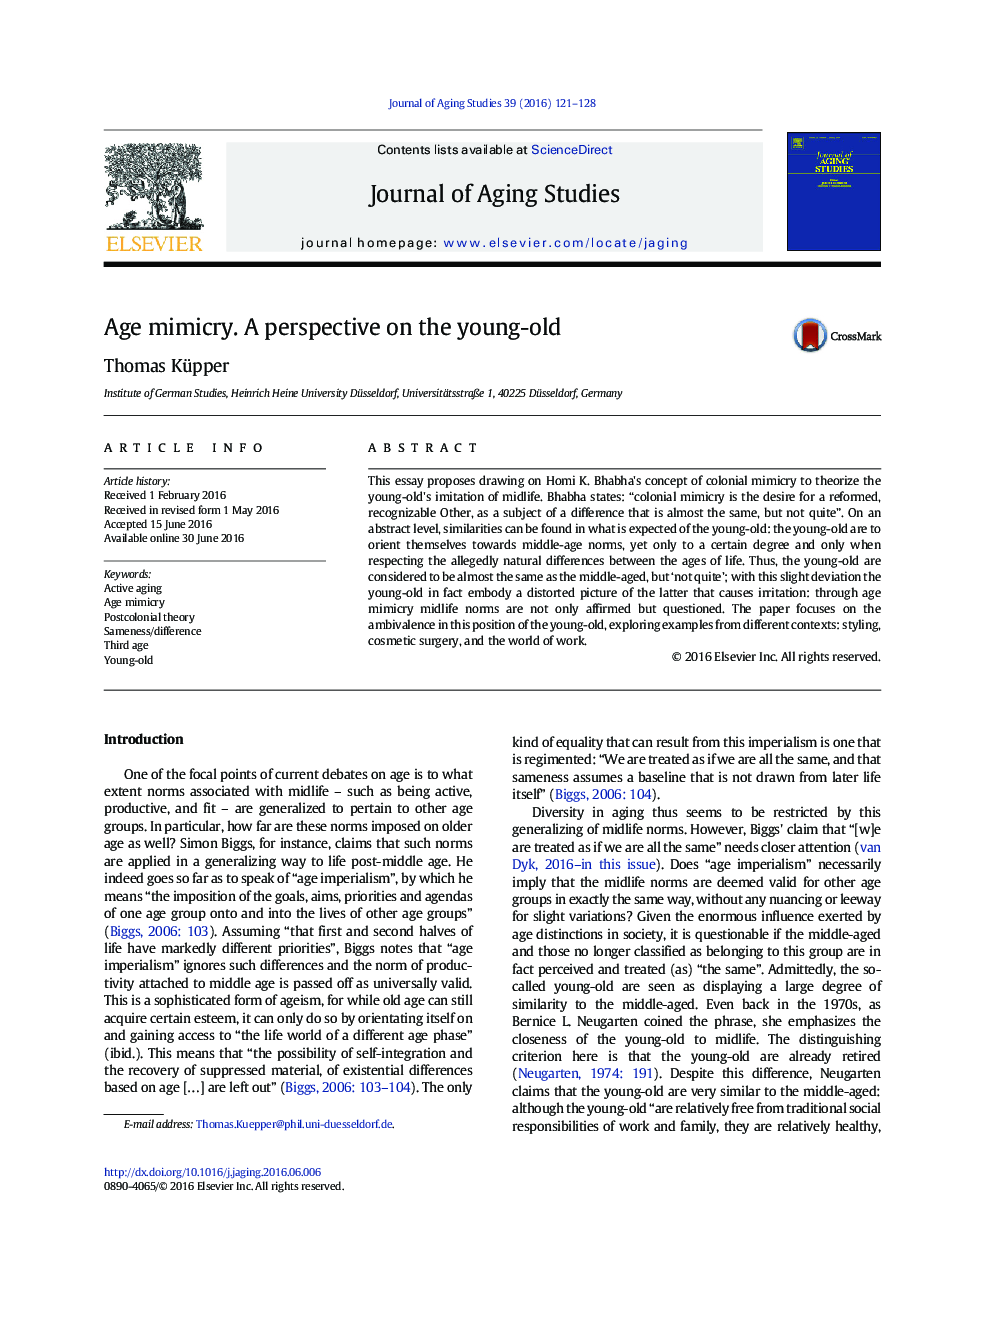 Age mimicry. A perspective on the young-old